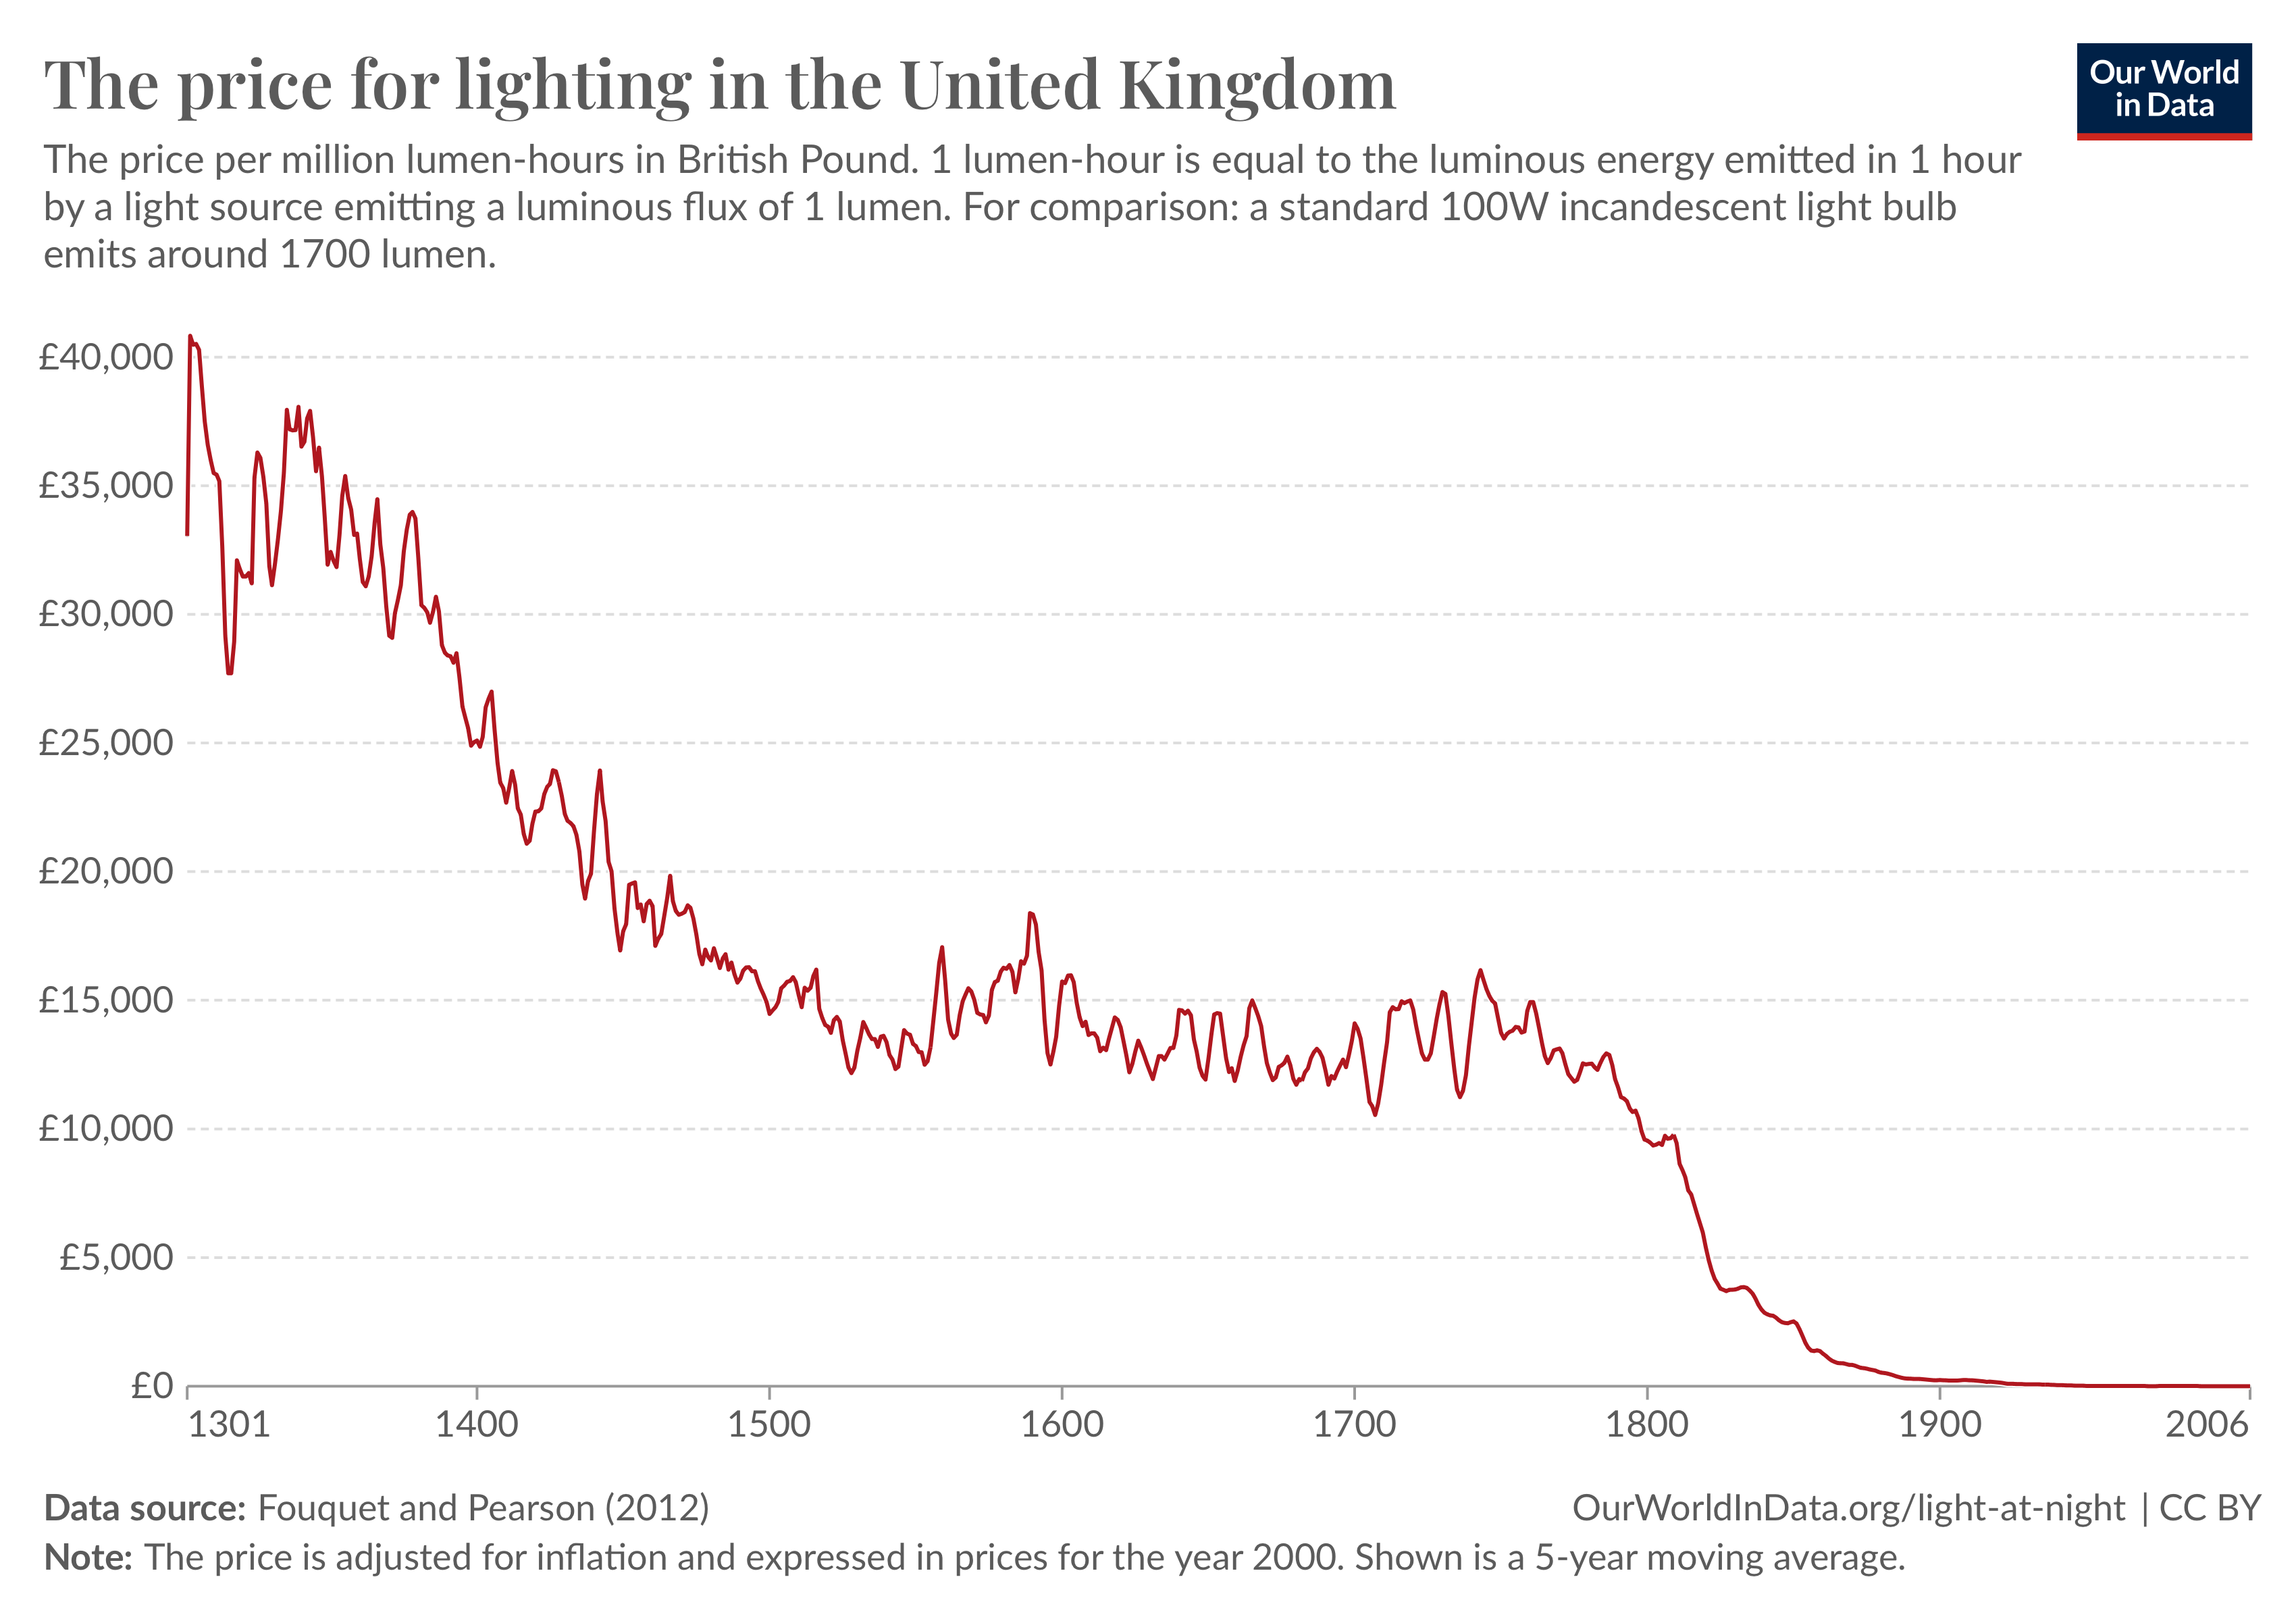 Line graph titled 'The price for lighting in the United Kingdom'. The graph displays the dramatic decrease in the price of lighting, measured in million lumen-hours in British Pounds, from 1301 to 2006. The y-axis ranges from £0 to £40,000 and the x-axis spans from the year 1301 to 2006. The line peaks early around 1301 at approximately £40,000 and shows a sharp decline towards 2006, where it reaches around £3. The data is a 5-year moving average and adjusted for inflation to year 2000 prices. The source is Fouquet and Pearson (2012).